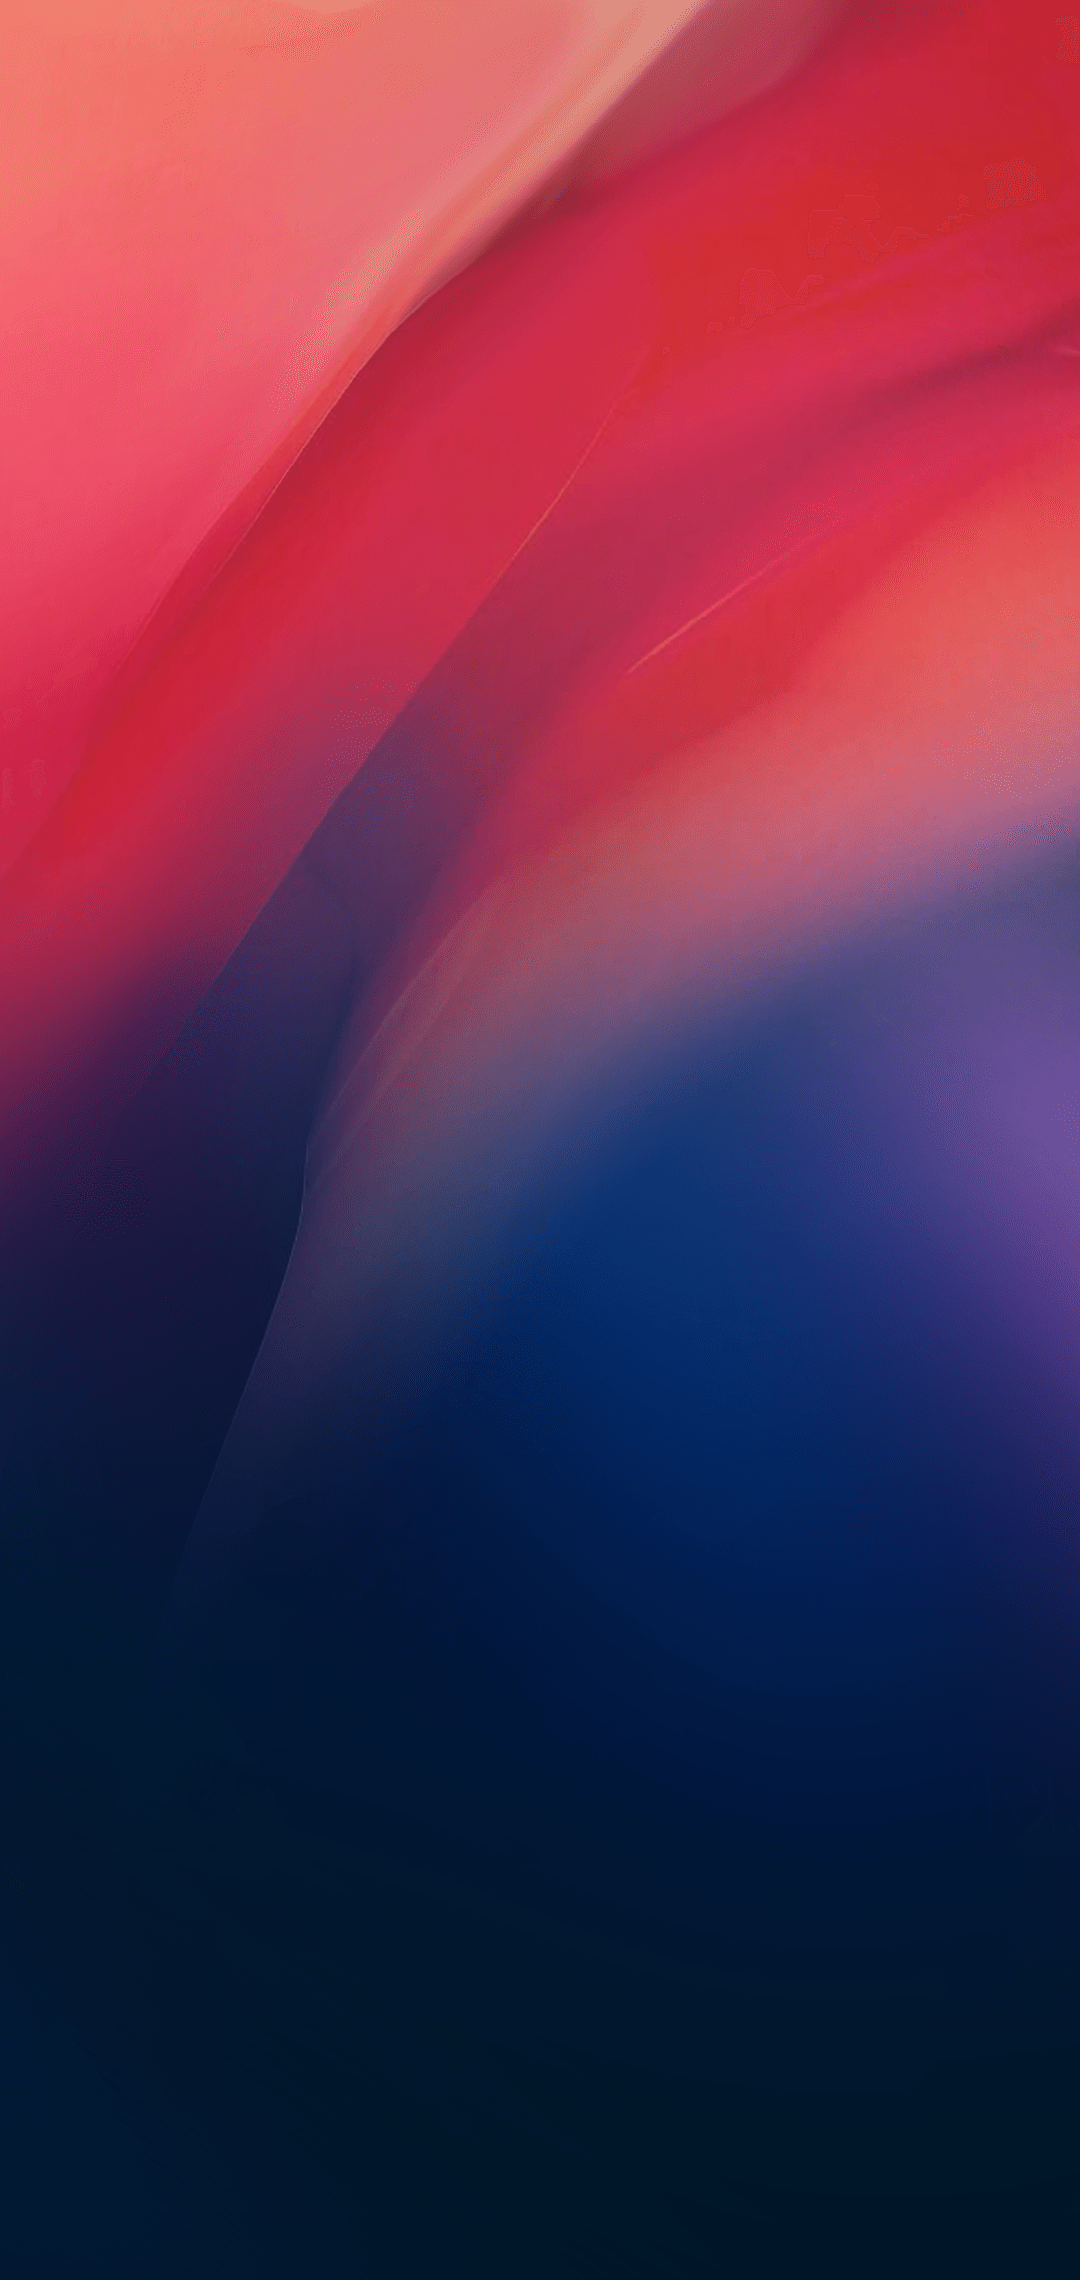 Redmi Note 7 and Redmi Note 7 Pro Wallpapers (Updated)